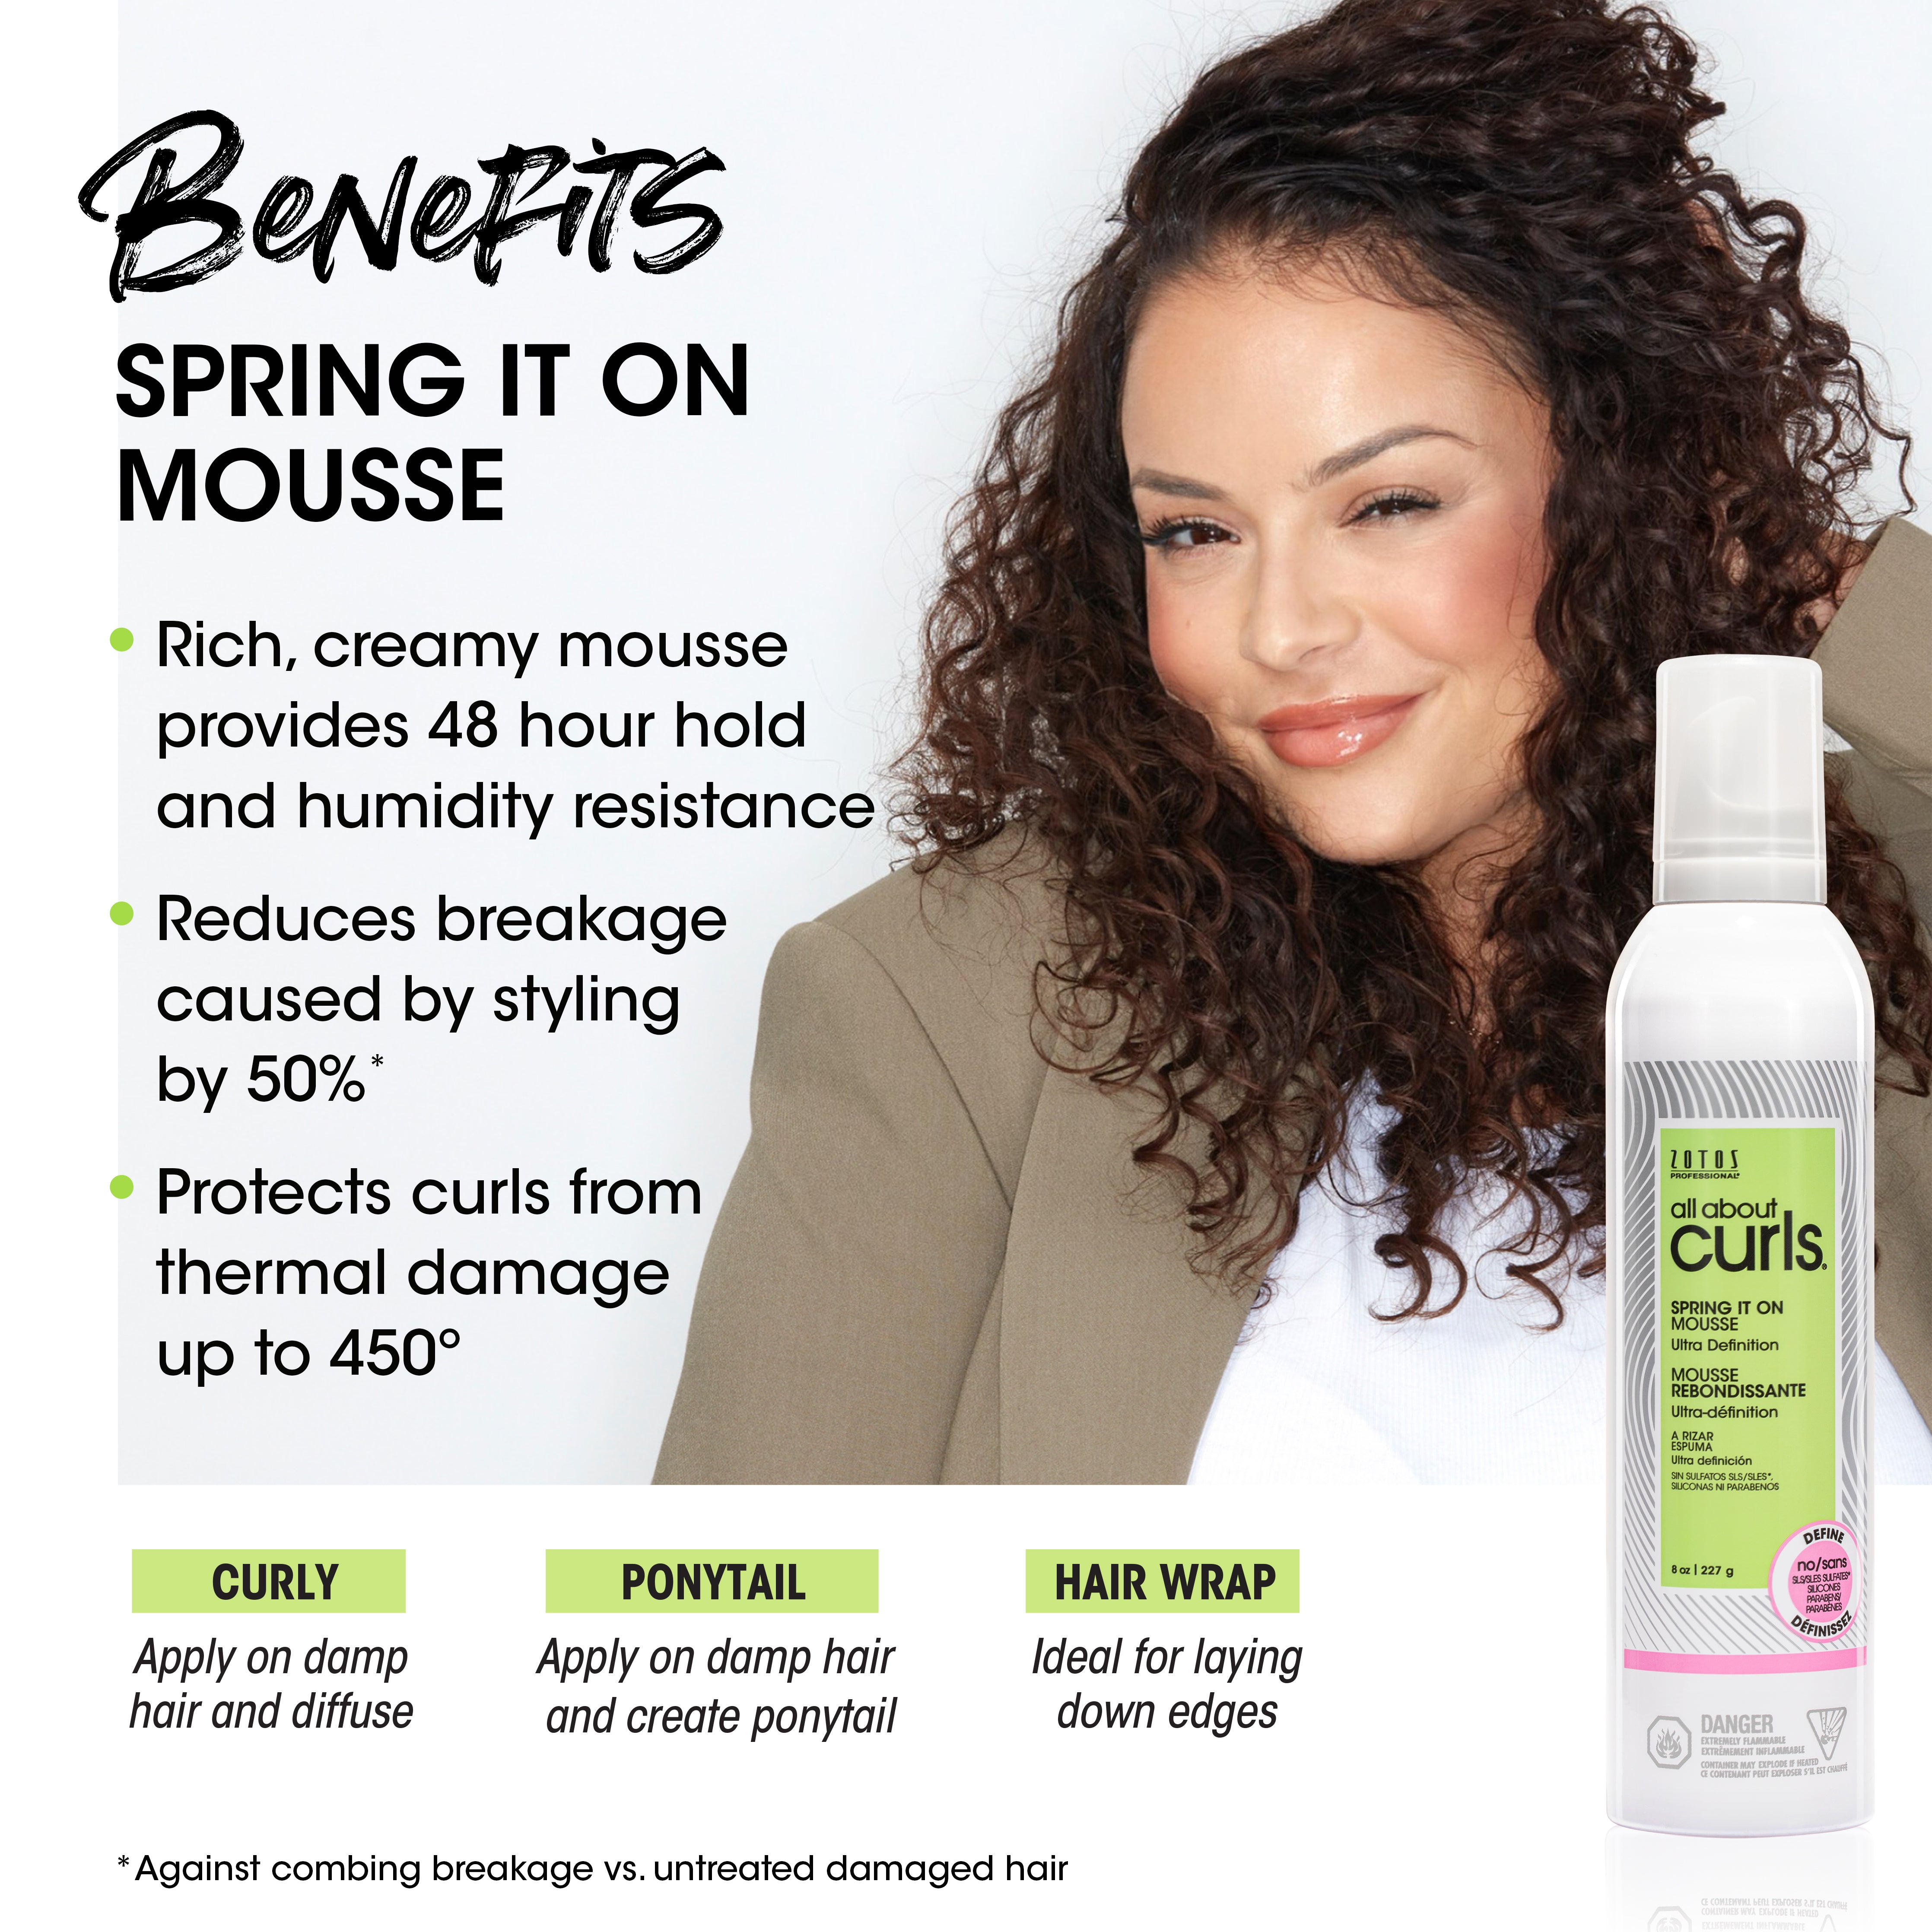 All About Curls® Spring It On Mousse